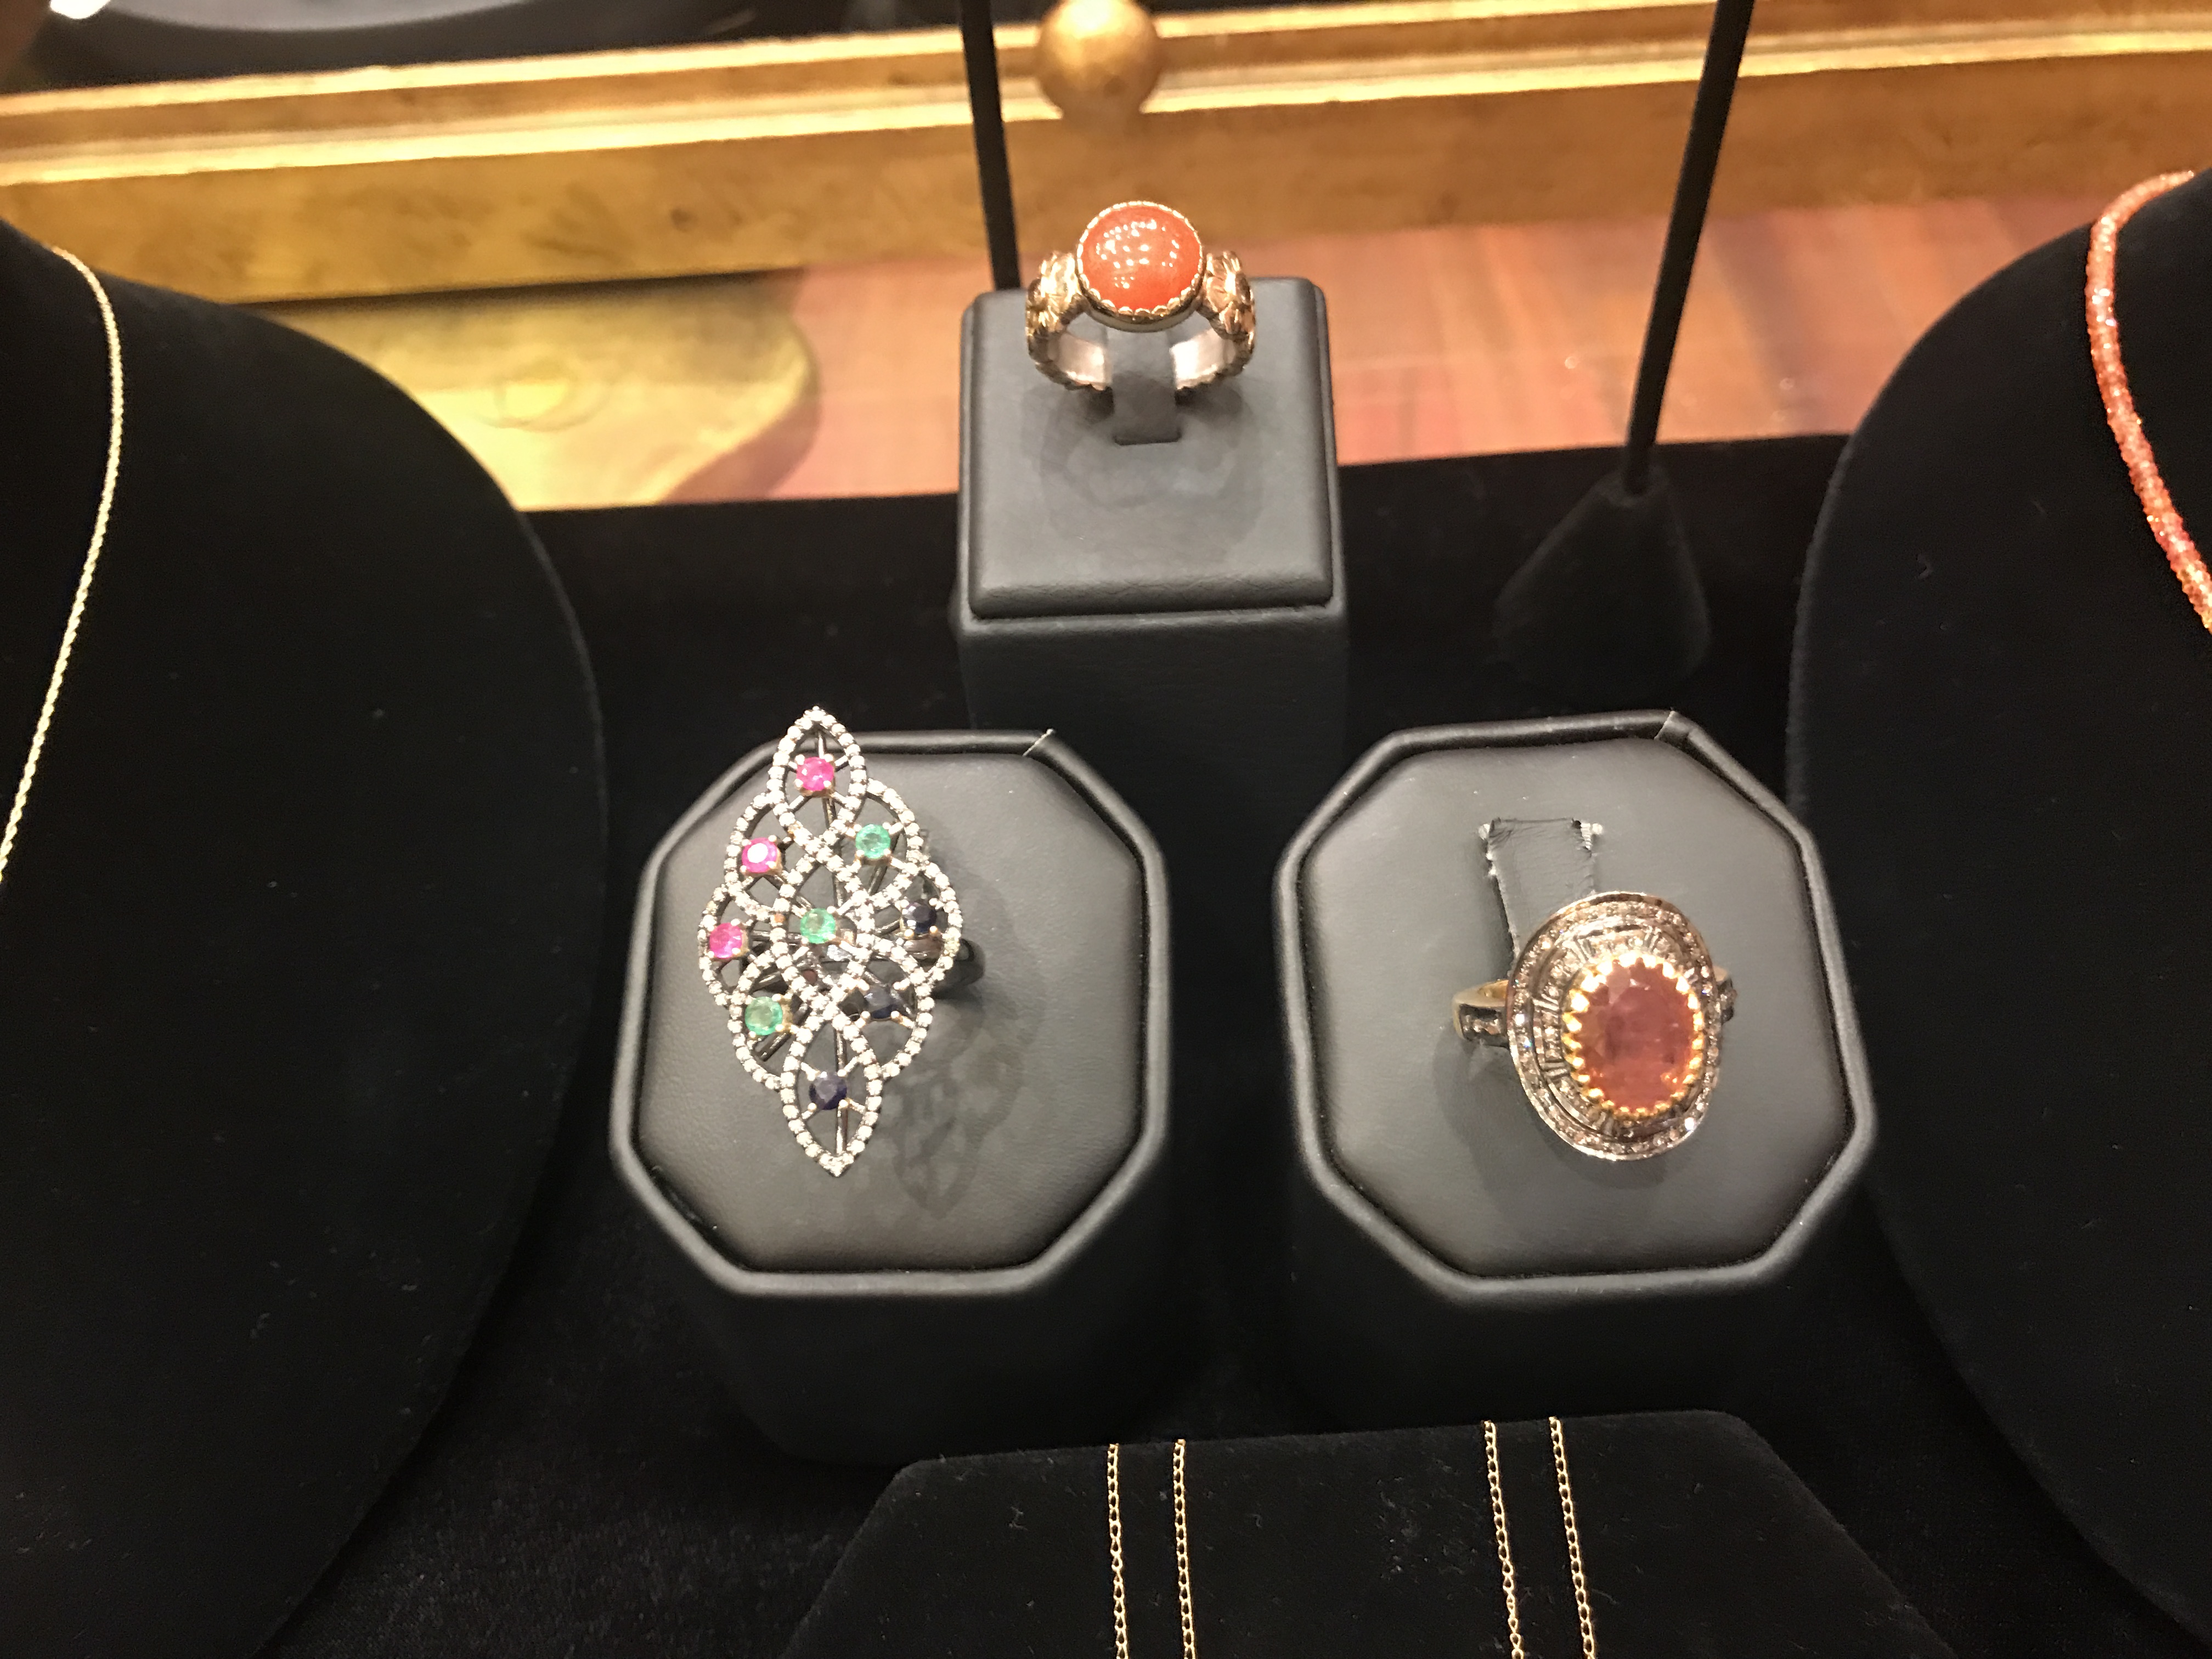 Independent jewelry shop Inaya trying to keep Greenwich Village vibe ...